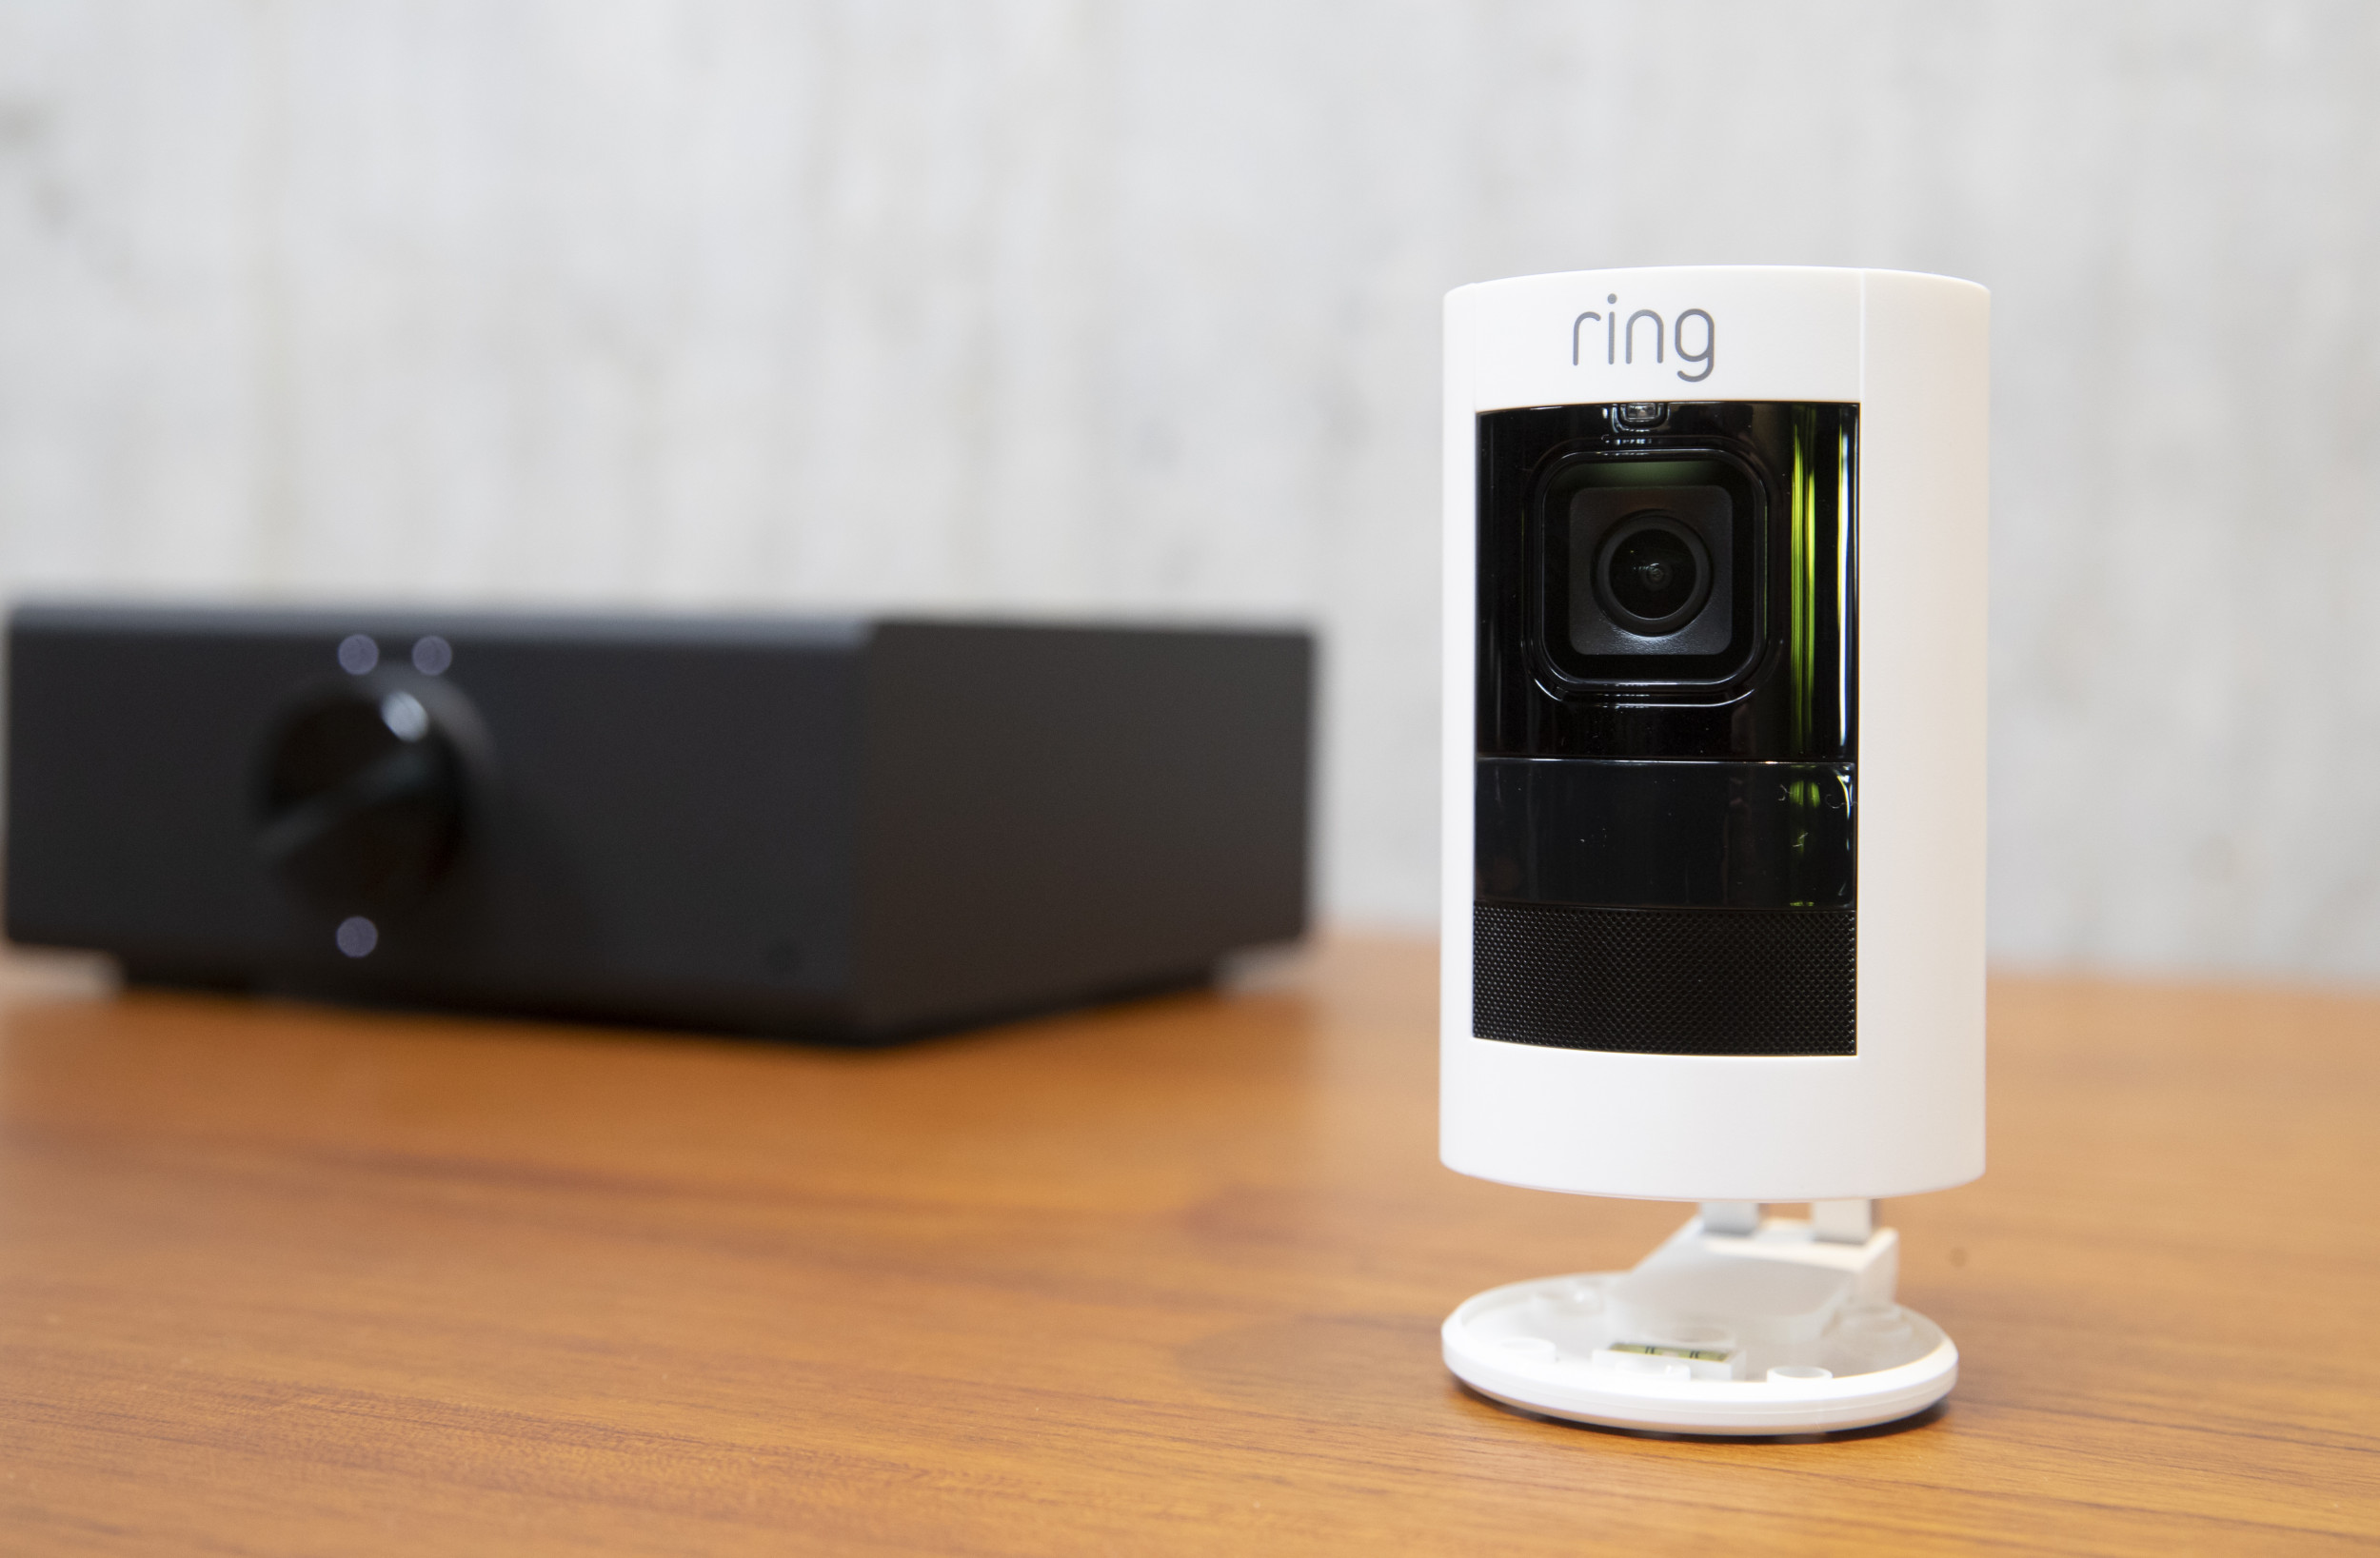 Blink vs Ring - Which Security System is the Best? | Security.org